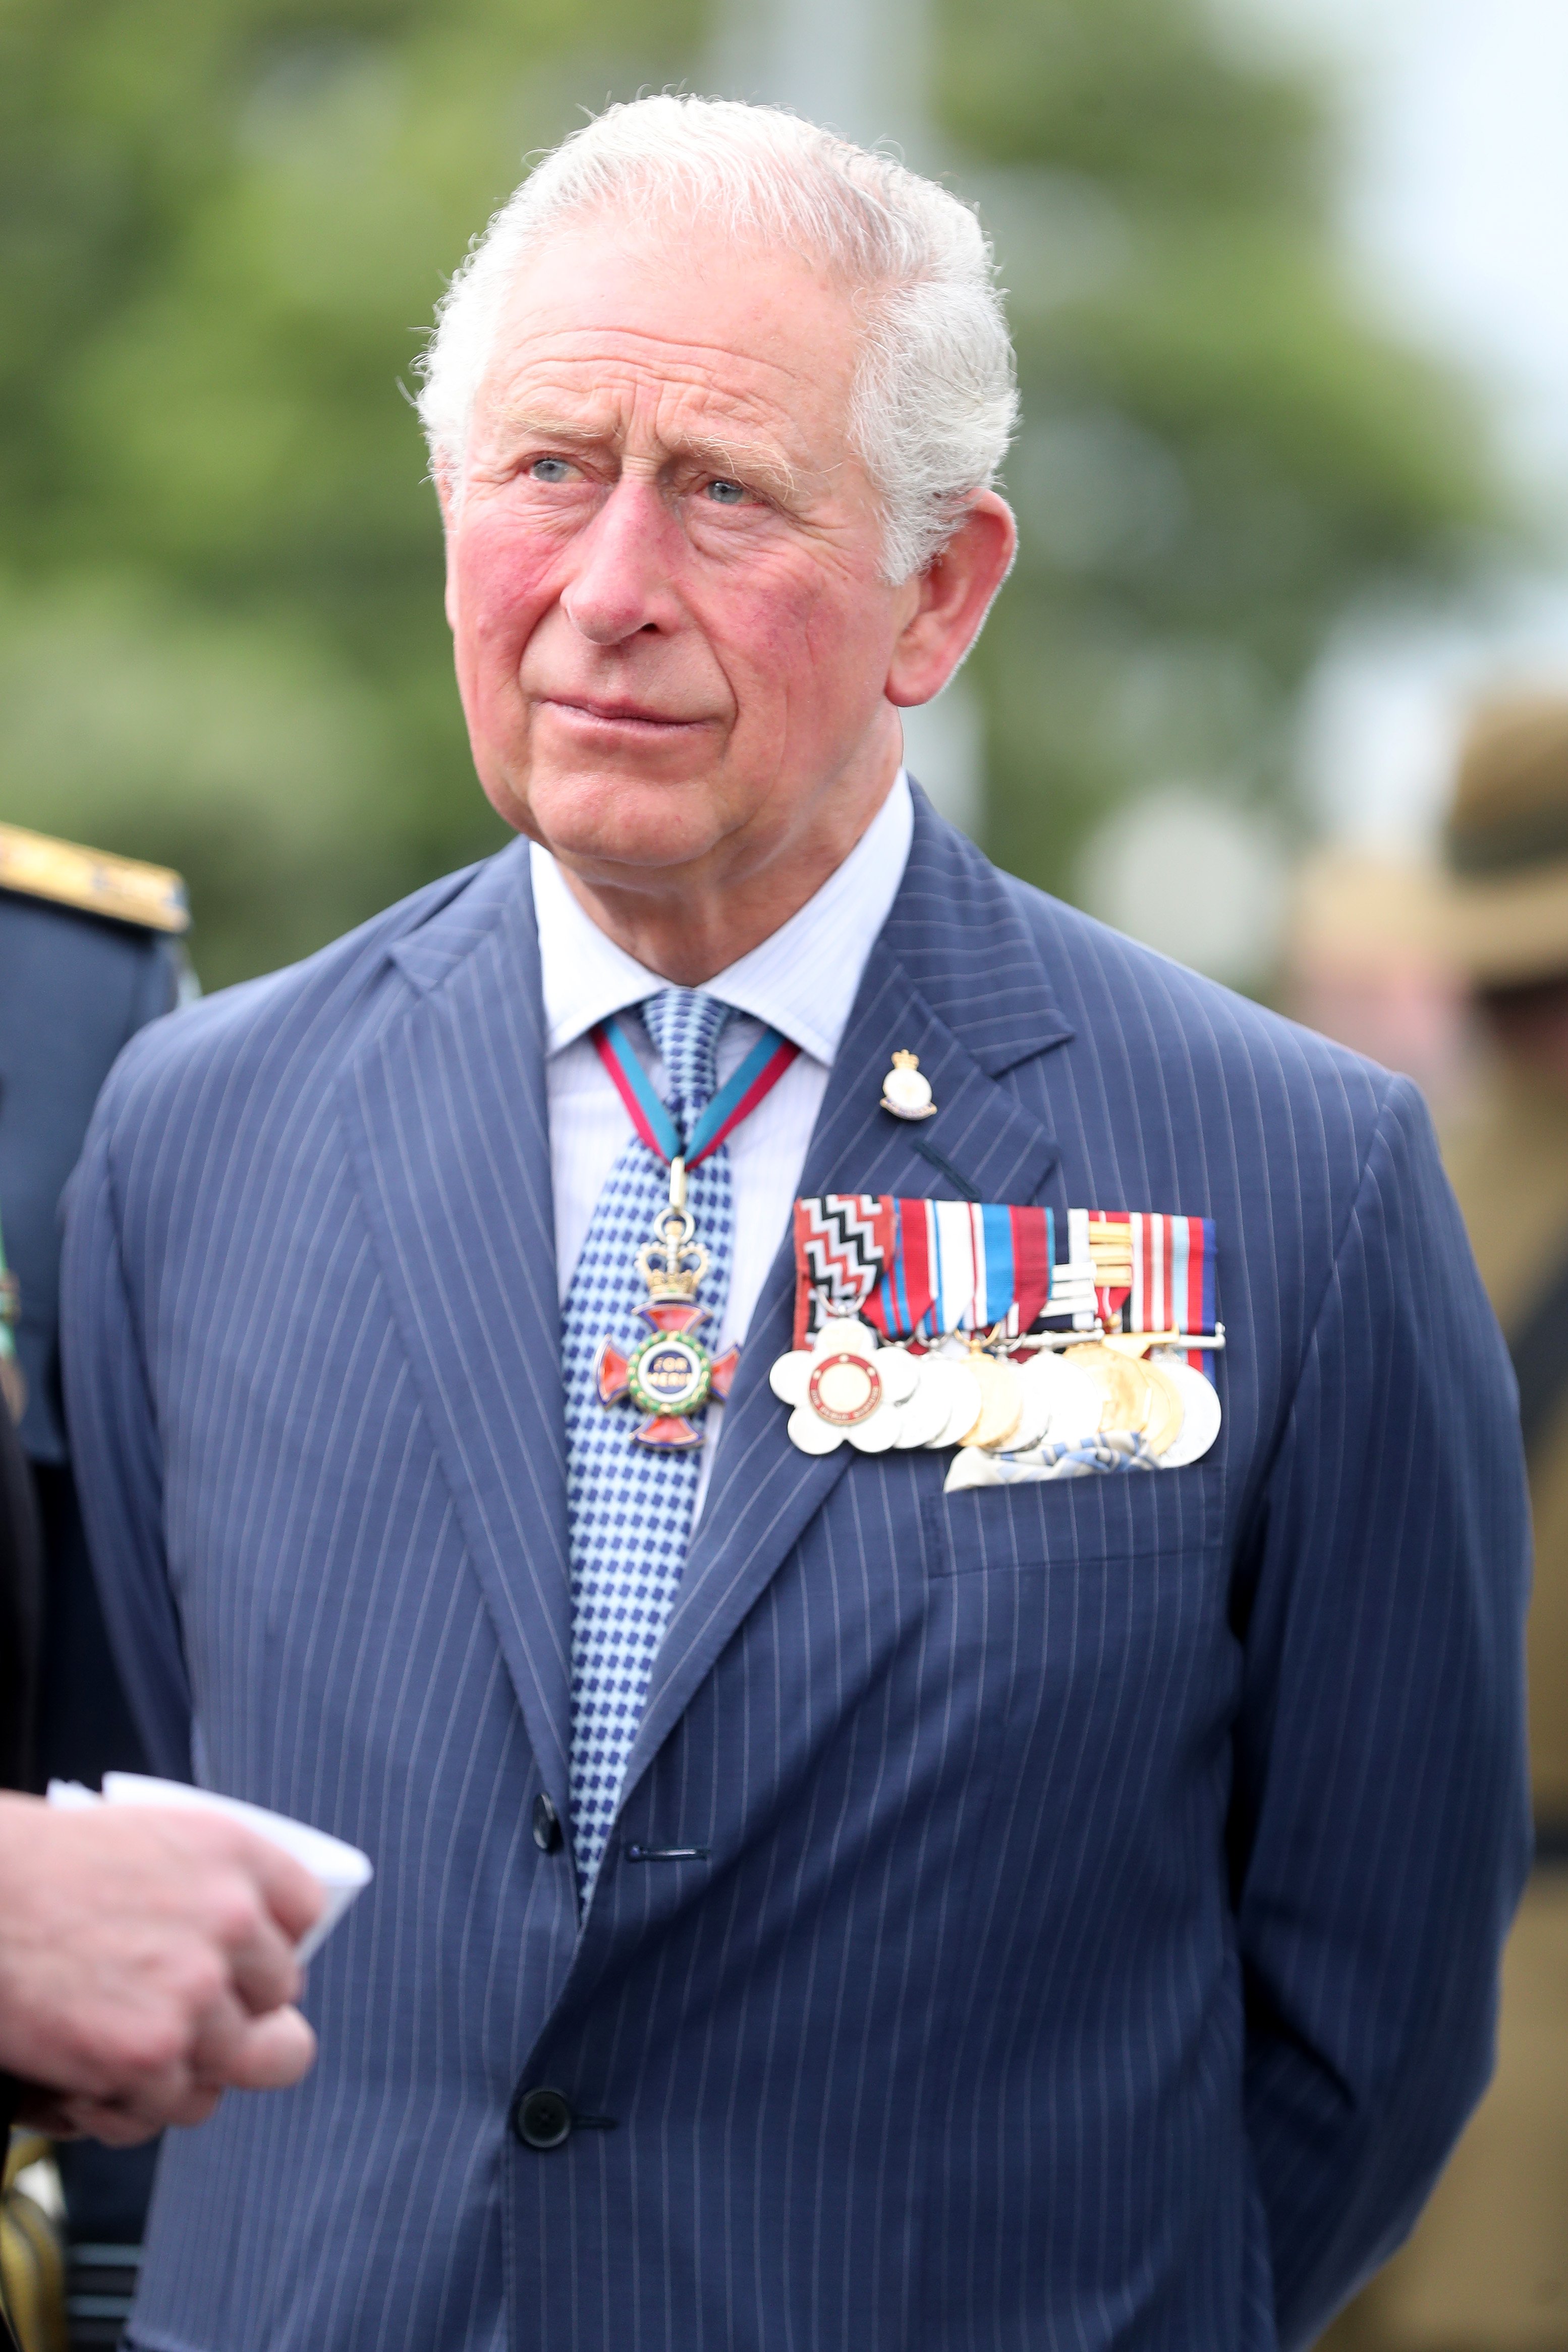 Prince Charles, now King attends a wreath laying ceremony at Mt Roskill War Memorial on November 18, 2019 in Auckland, New Zealand | Source: Getty Images